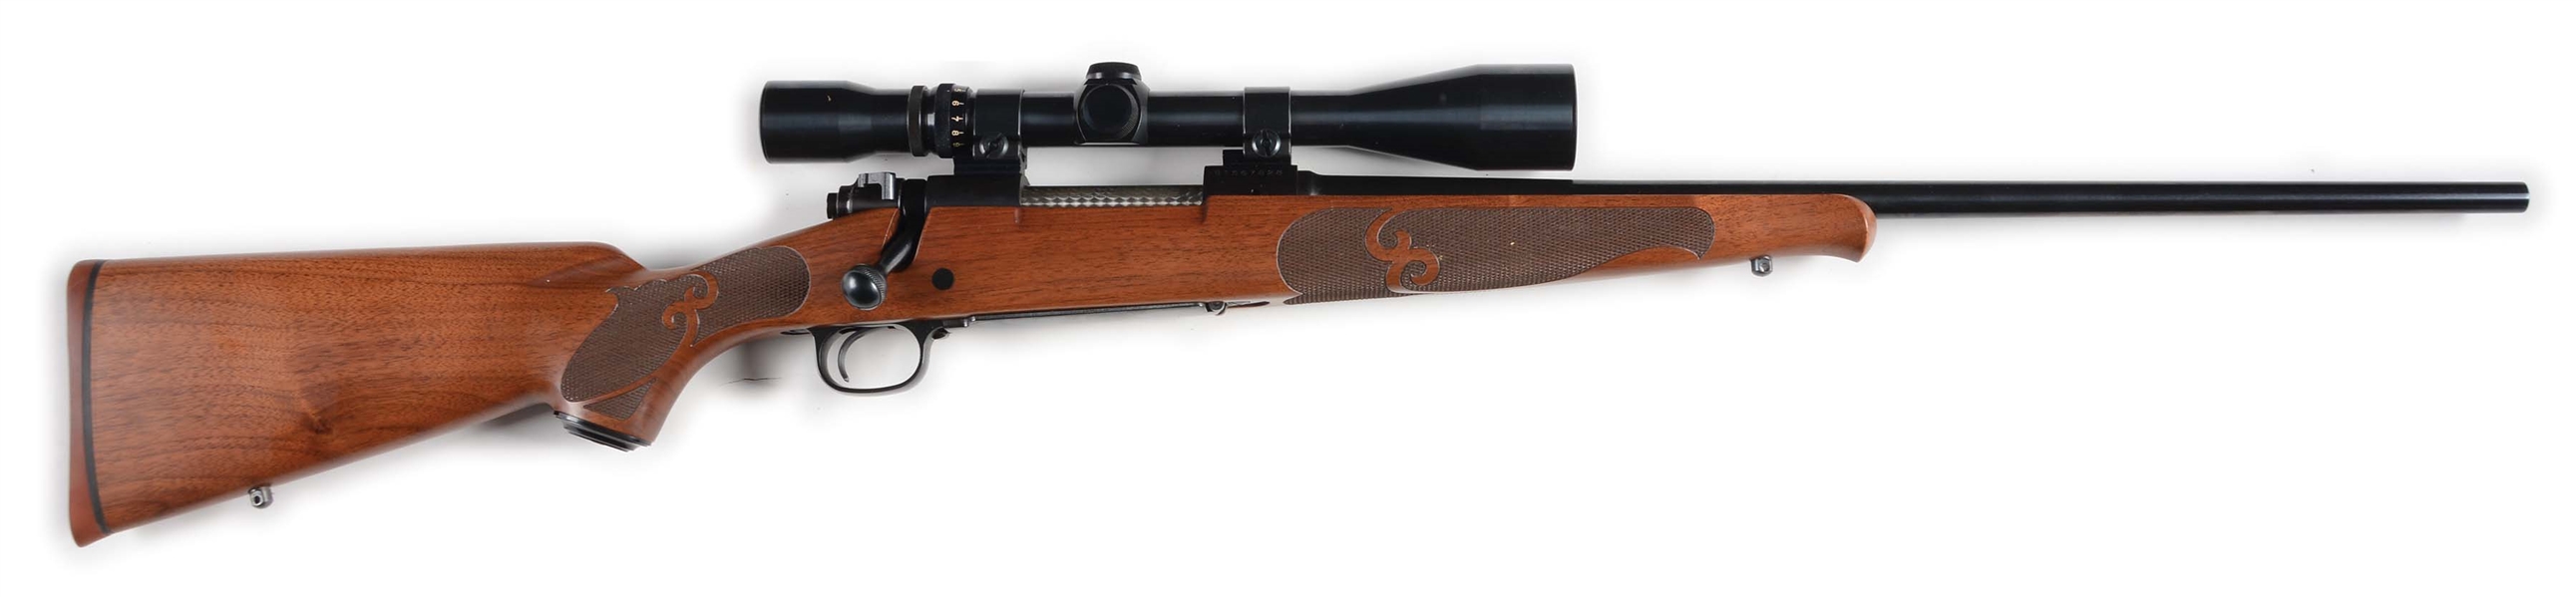 (M) BOXED WINCHESTER MODEL 70 XTR FEATHERWEIGHT BOLT ACTION RIFLE.